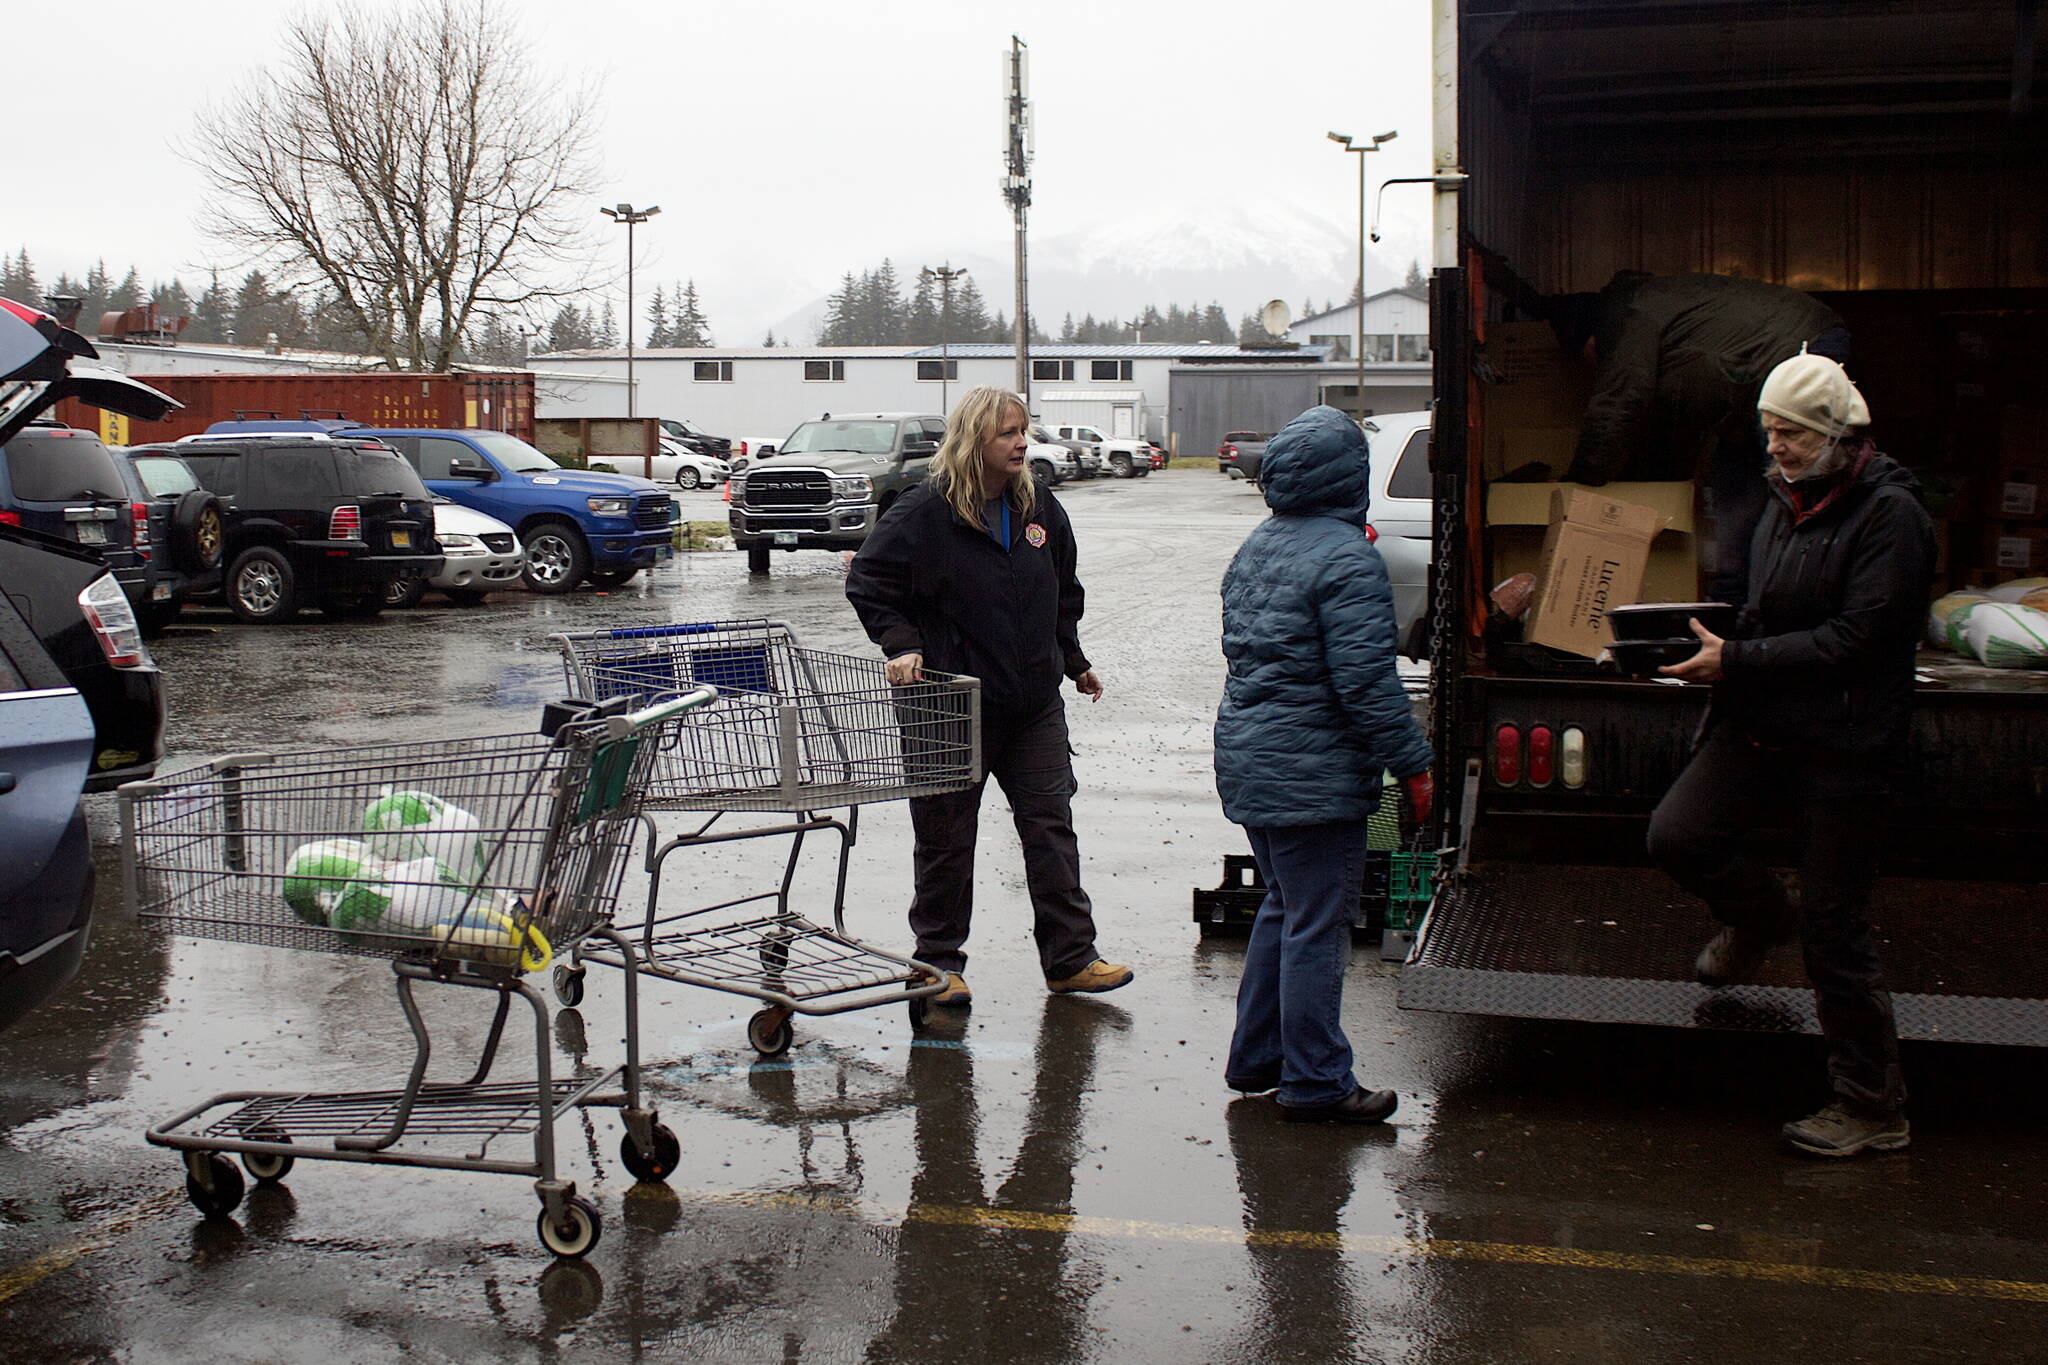 Volunteers load food for Thanksgiving food baskets into vehicles for delivery Saturday morning in the St. Vincent de Paul parking lot. (Mark Sabbatini / Juneau Empire)